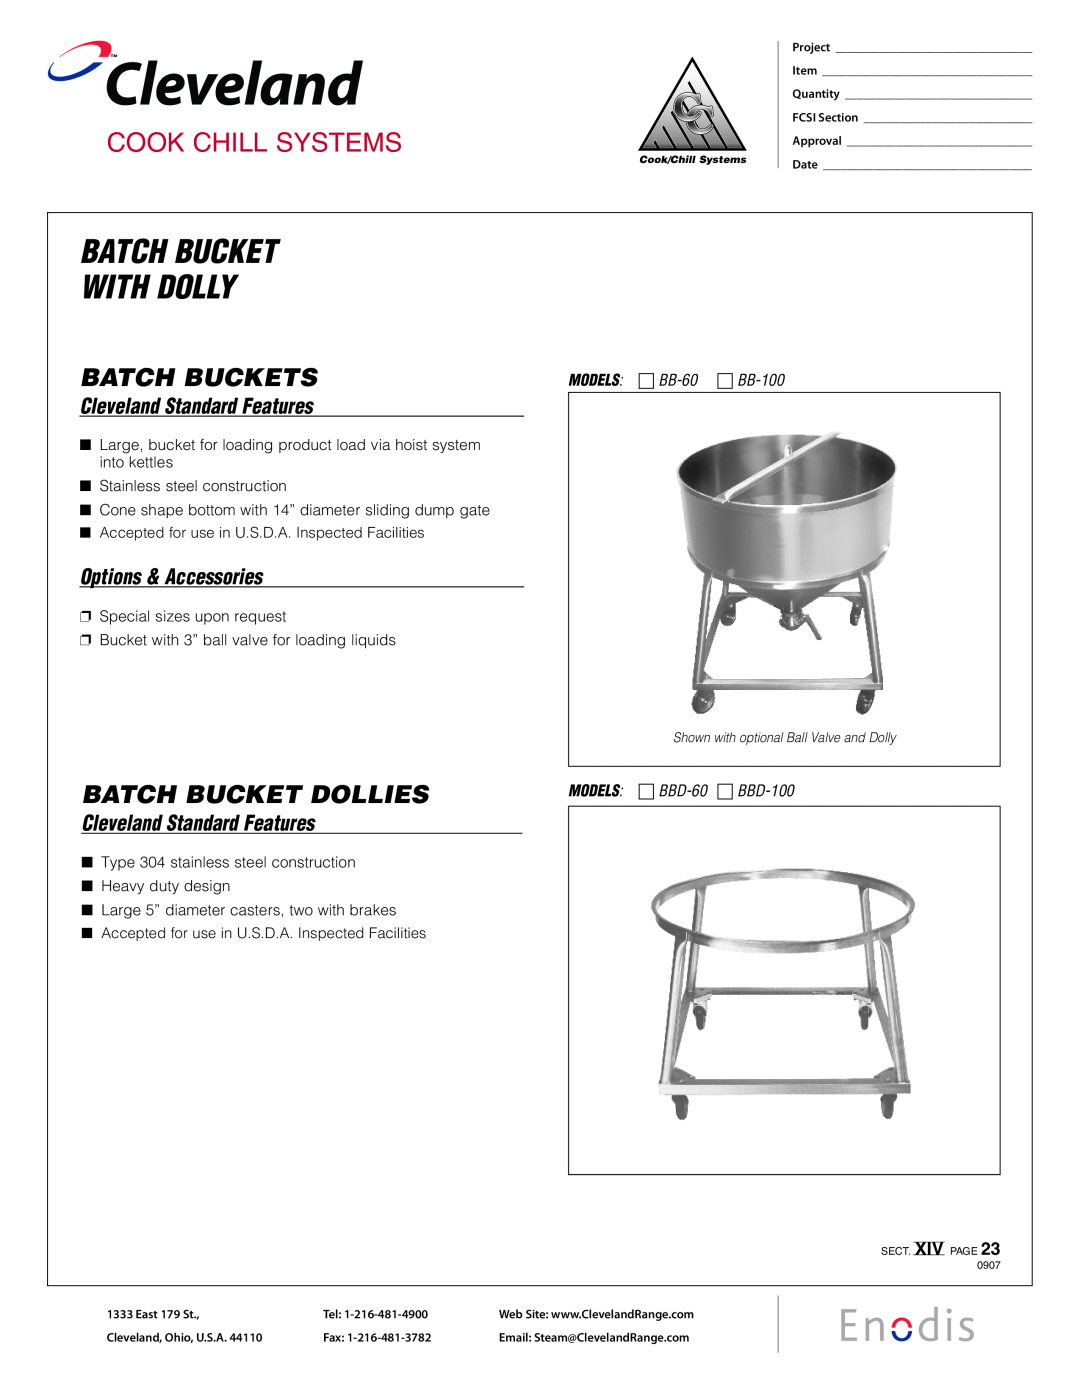 Cleveland Range BB-60 manual Cleveland, Cook Chill Systems, Batch Bucket With Dolly, Batch Buckets, Batch Bucket Dollies 